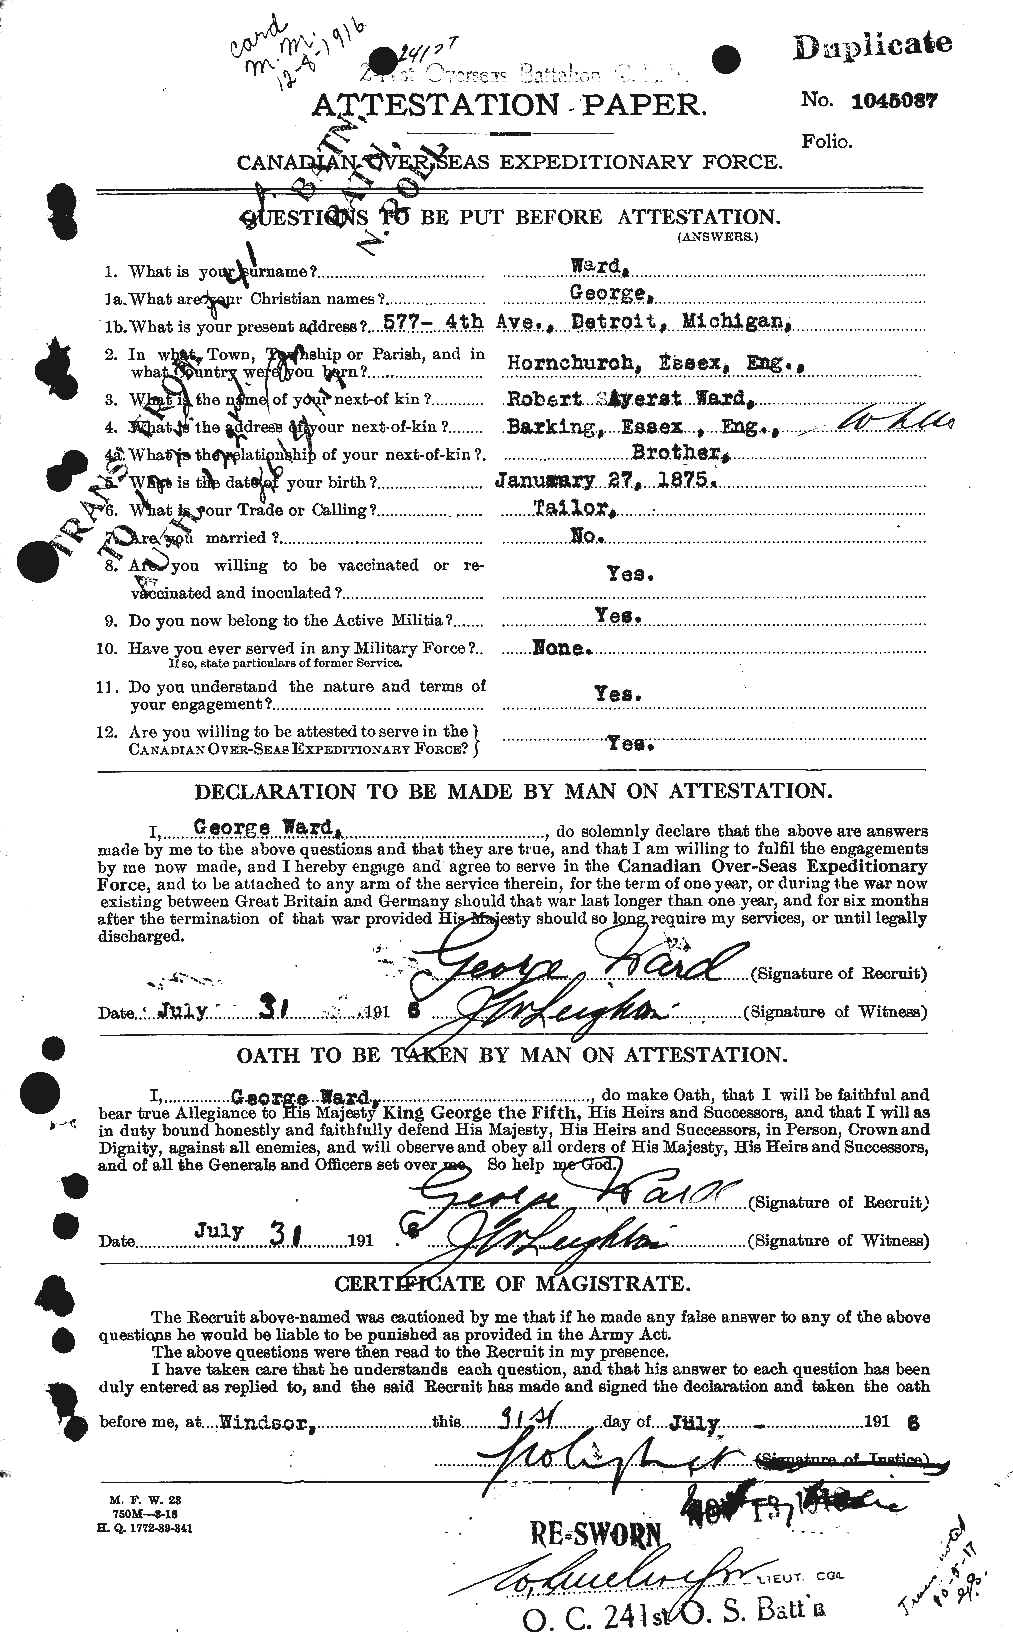 Personnel Records of the First World War - CEF 657758a